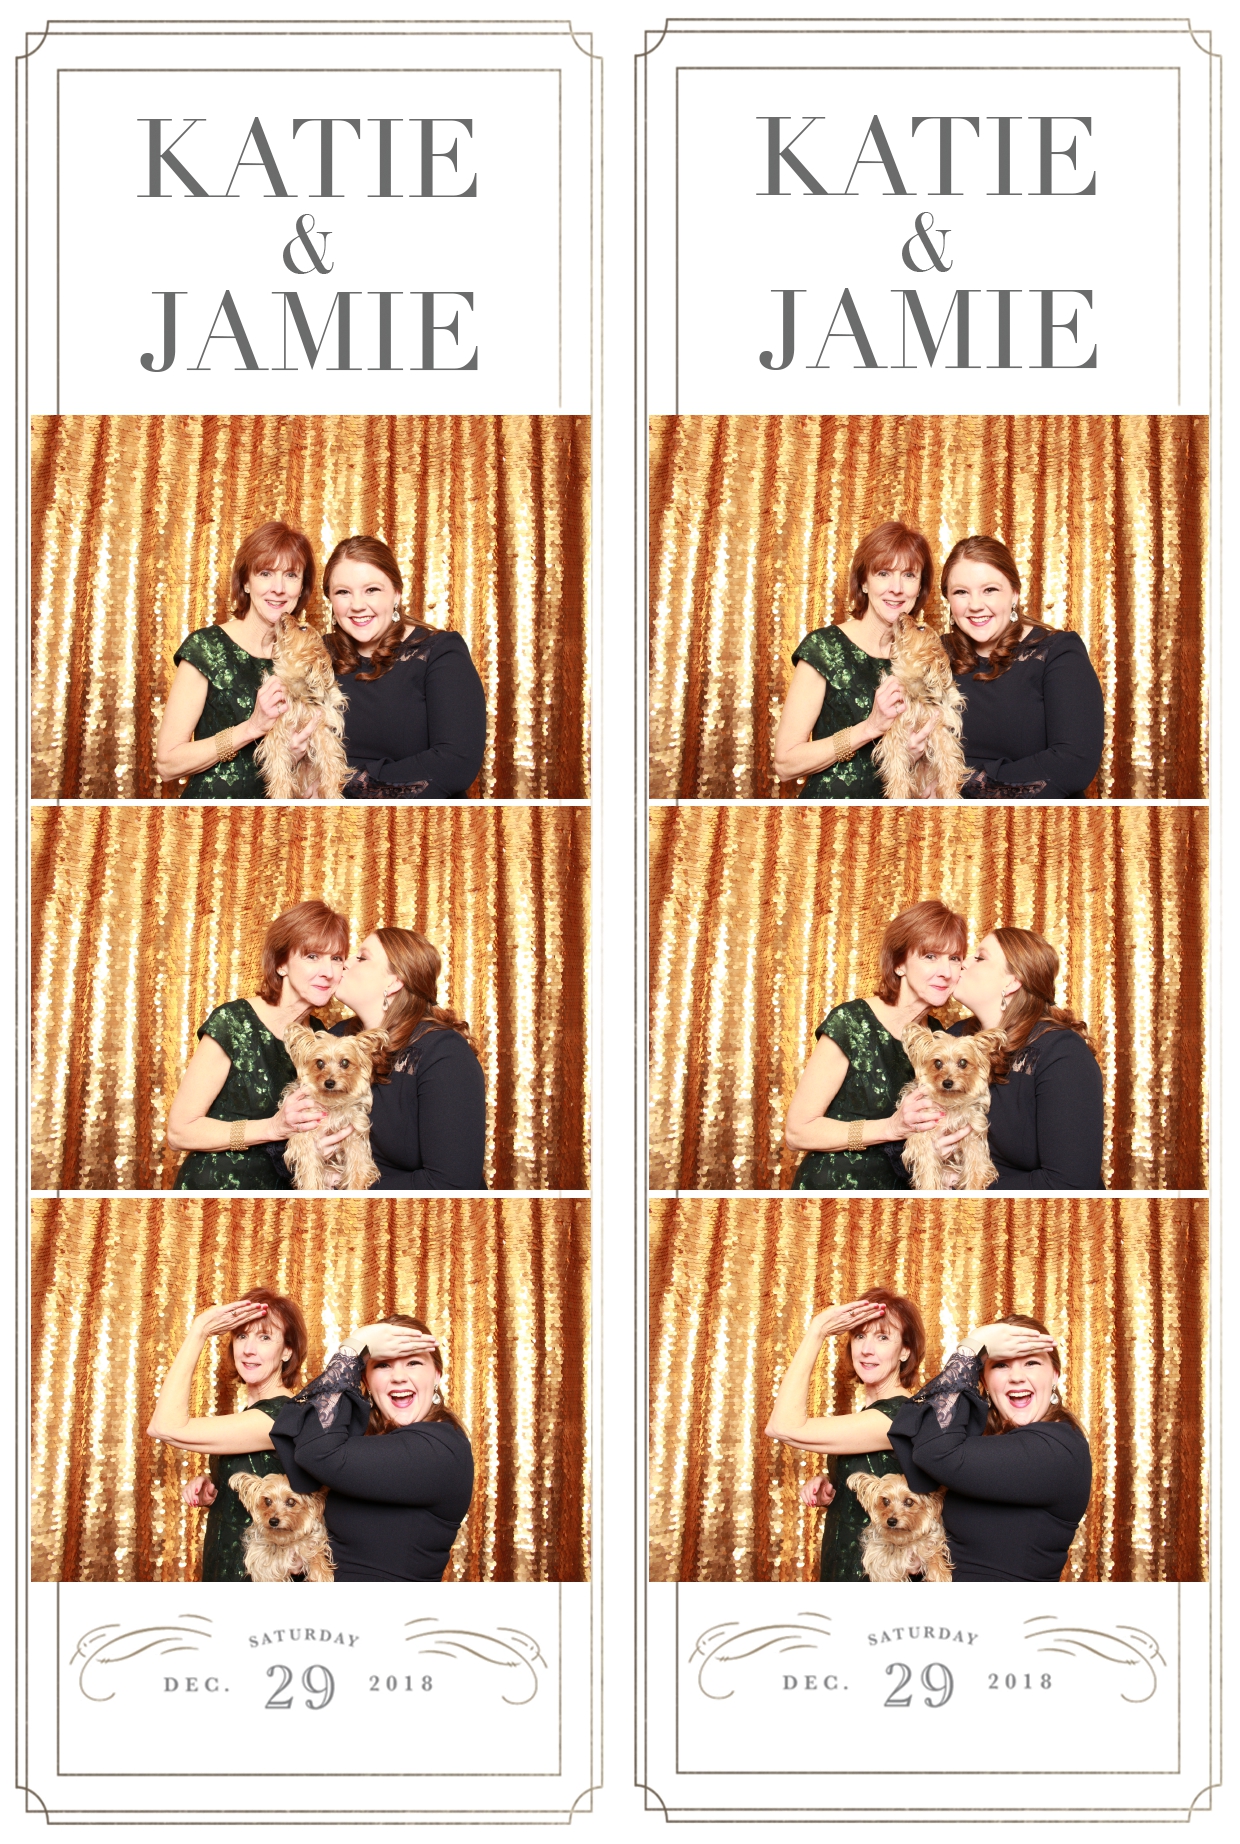 Oh Happy Day Booth - Katie and Jamie Customized19.jpg